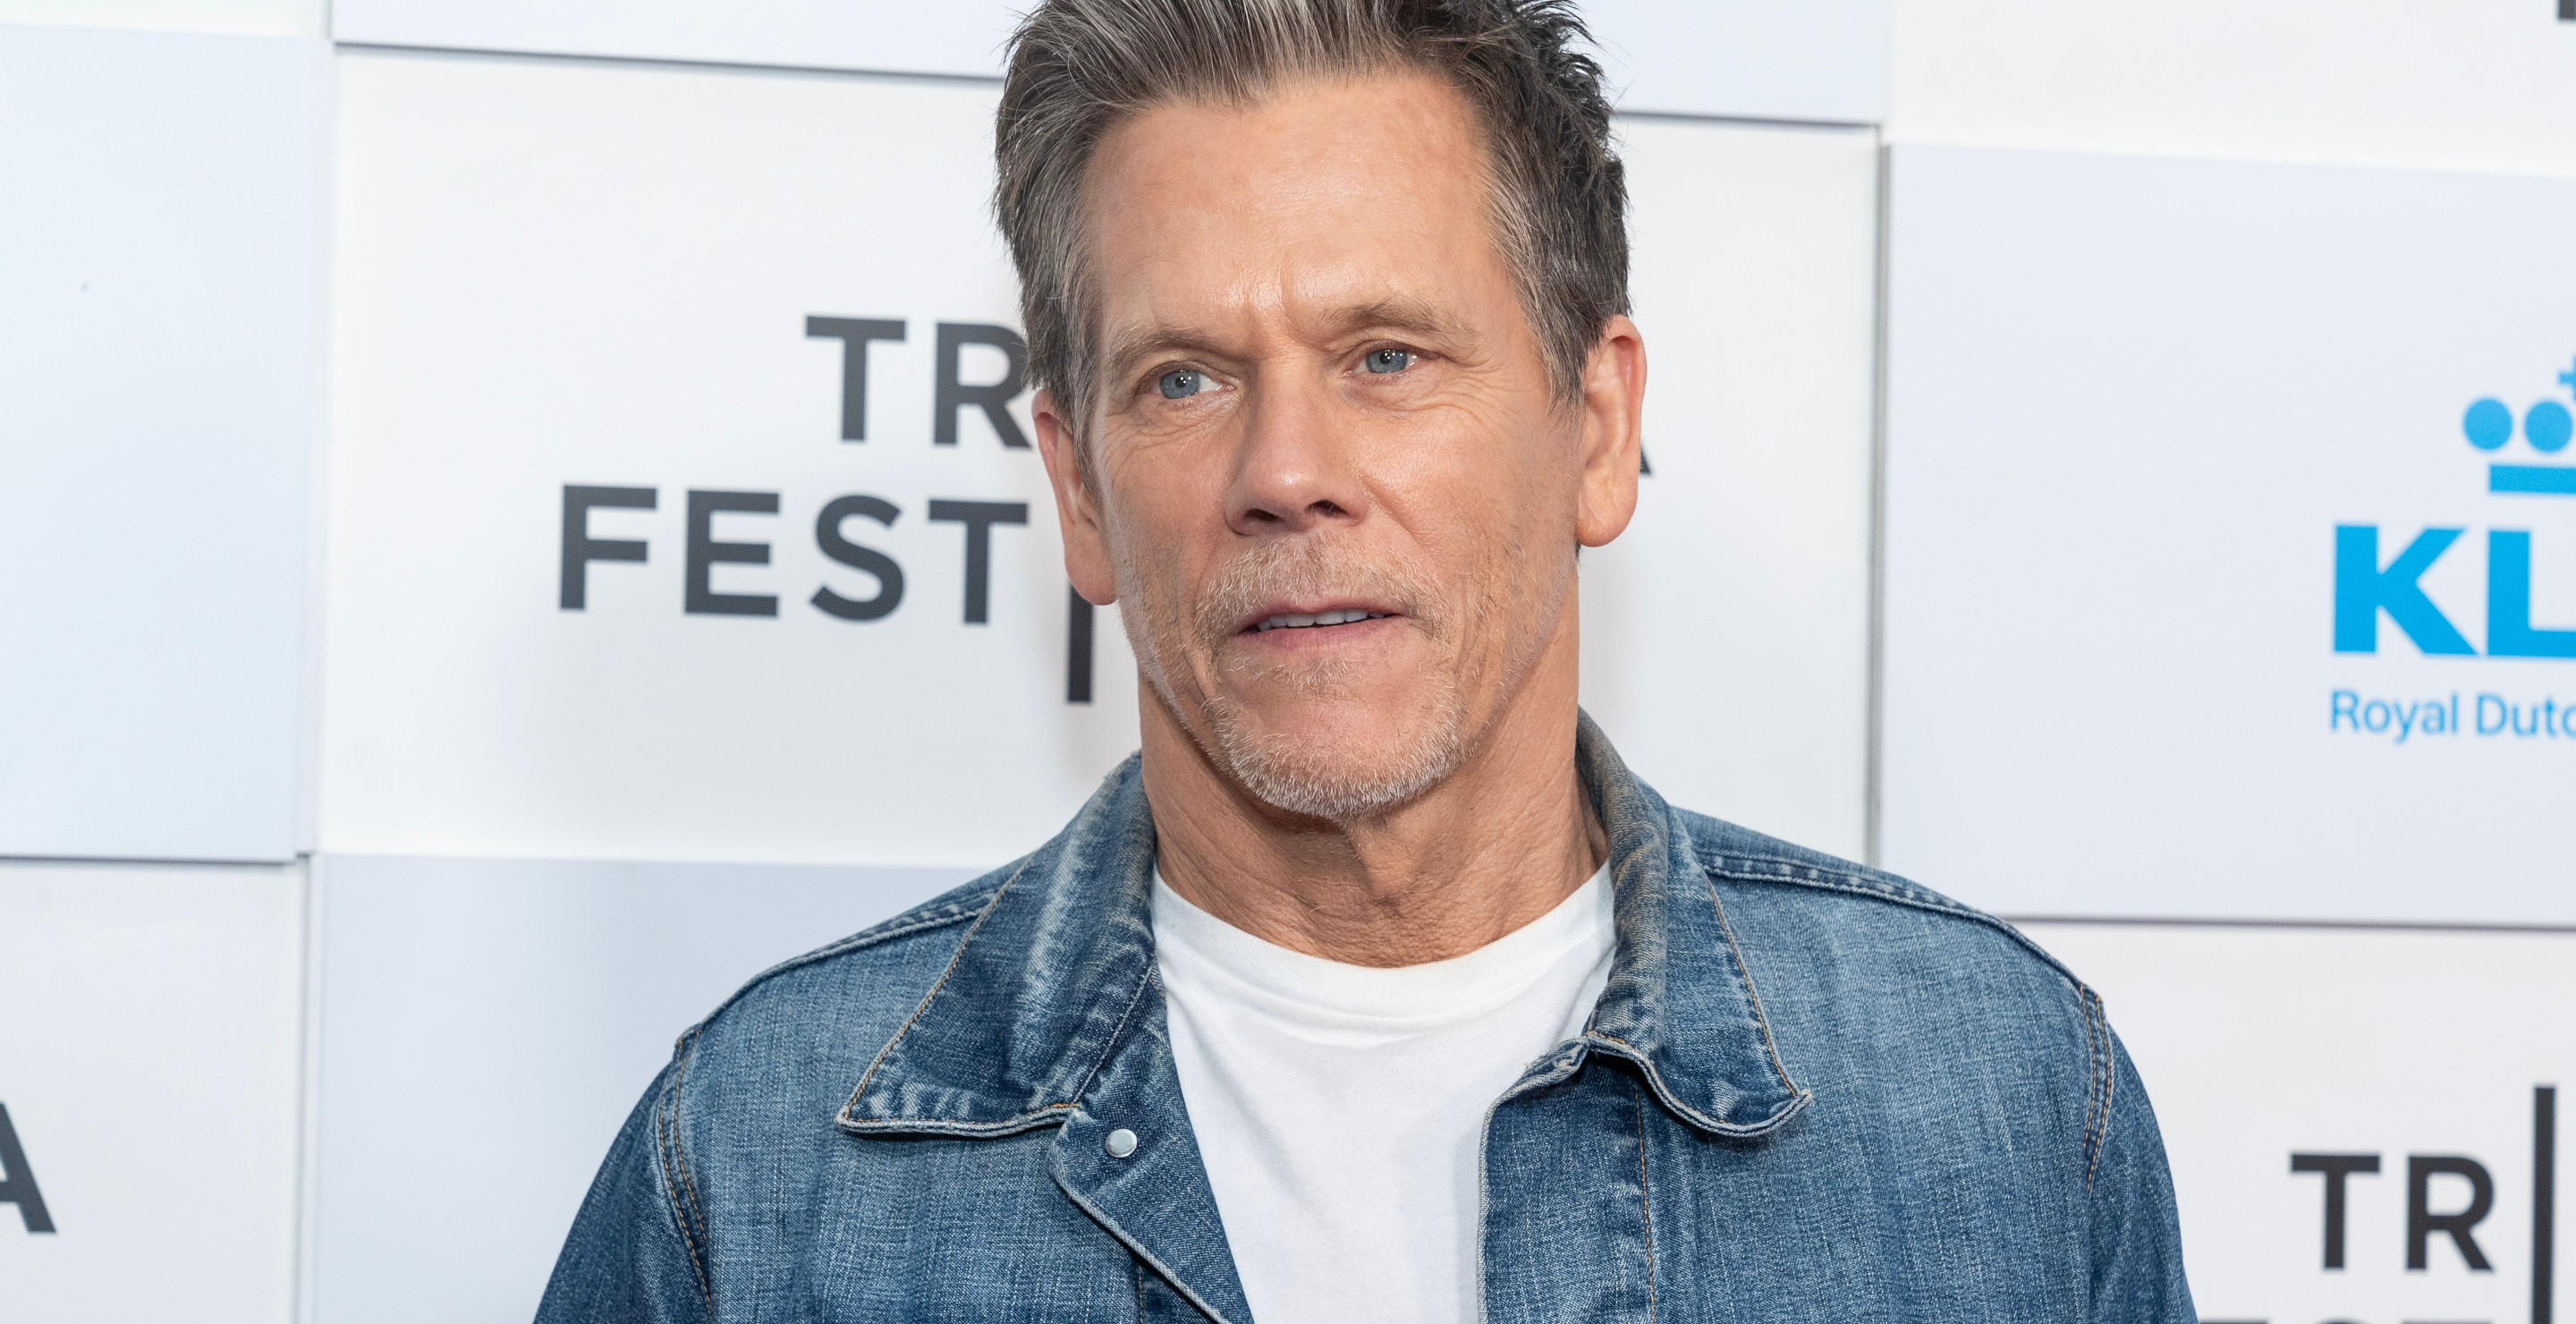 Kevin Bacon disguised himself as a normal person, but hated it: “This sucks. I want to be famous again.”